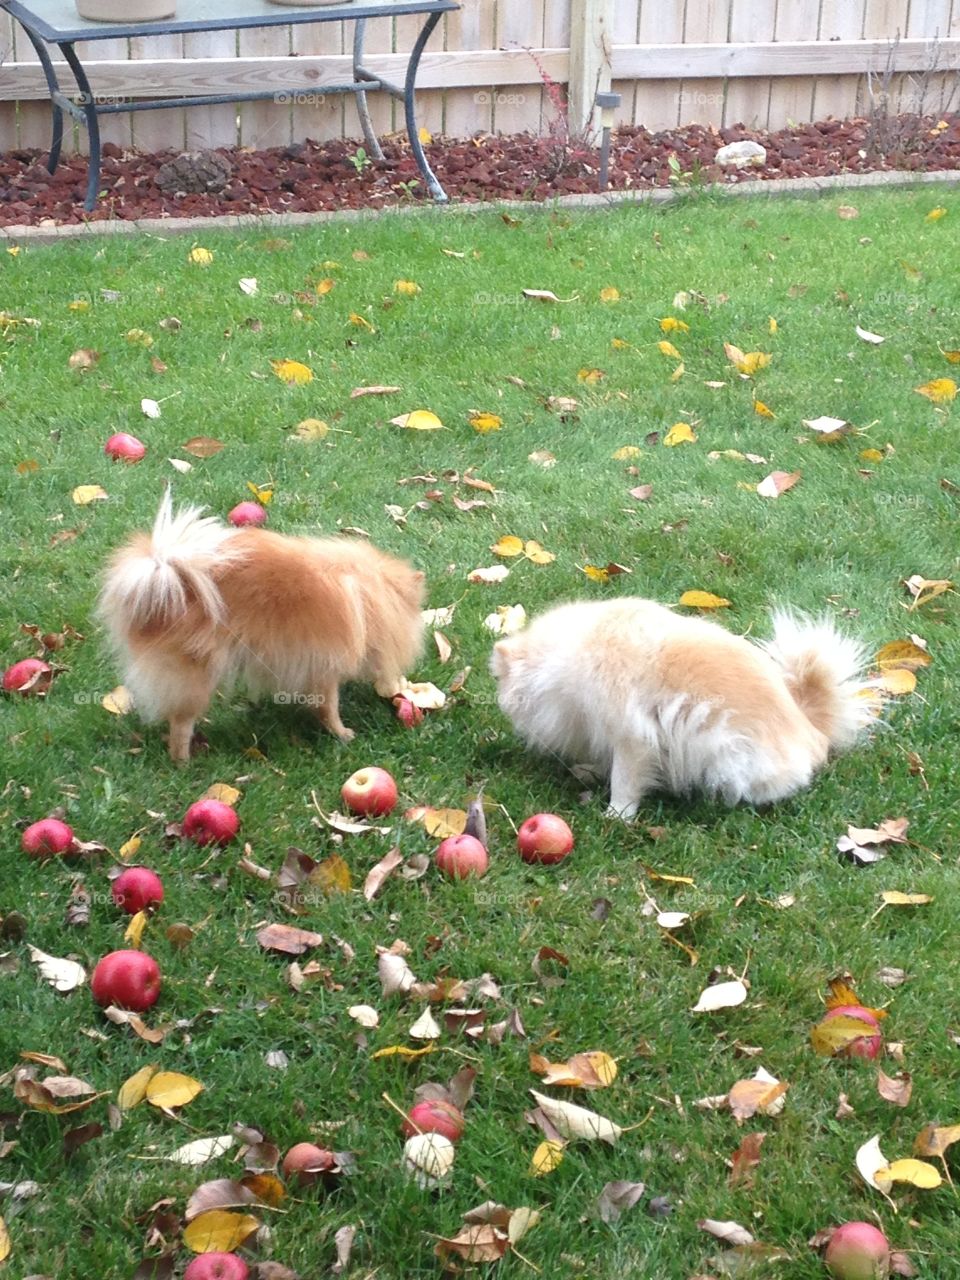 Dogs staring at the fallen apples. 